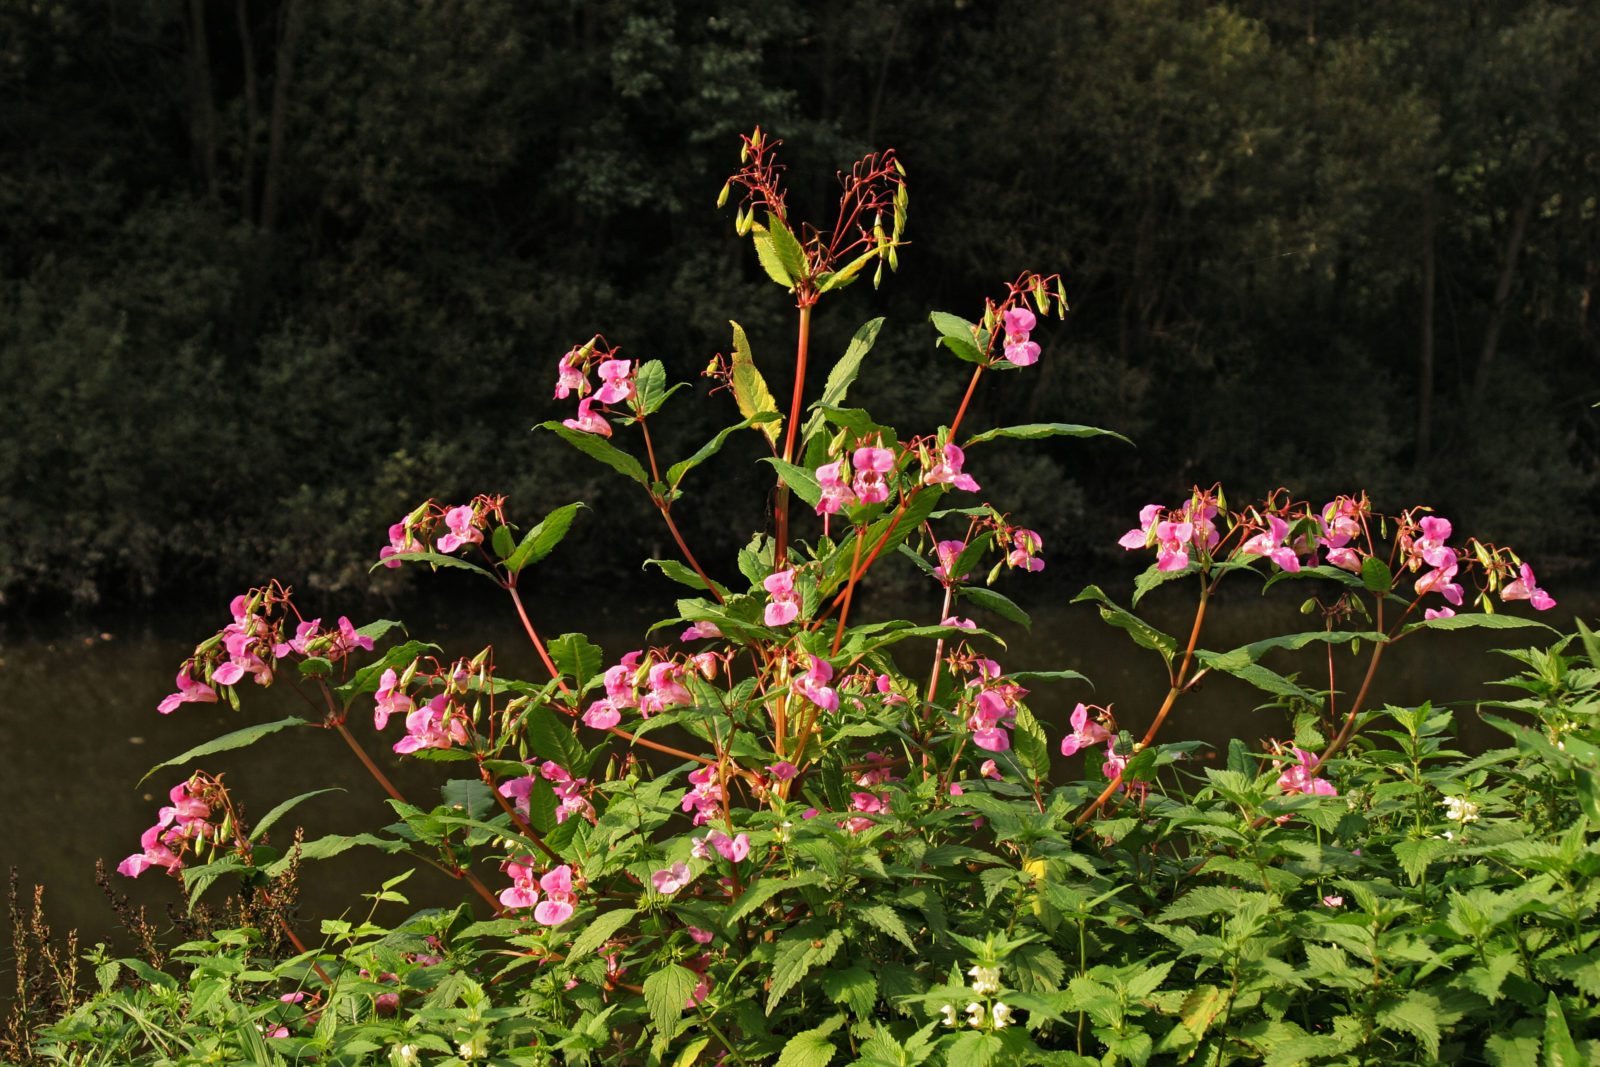 Himalayan balsam is an invasive plant that will take over the natural habitat of native plants in the UK